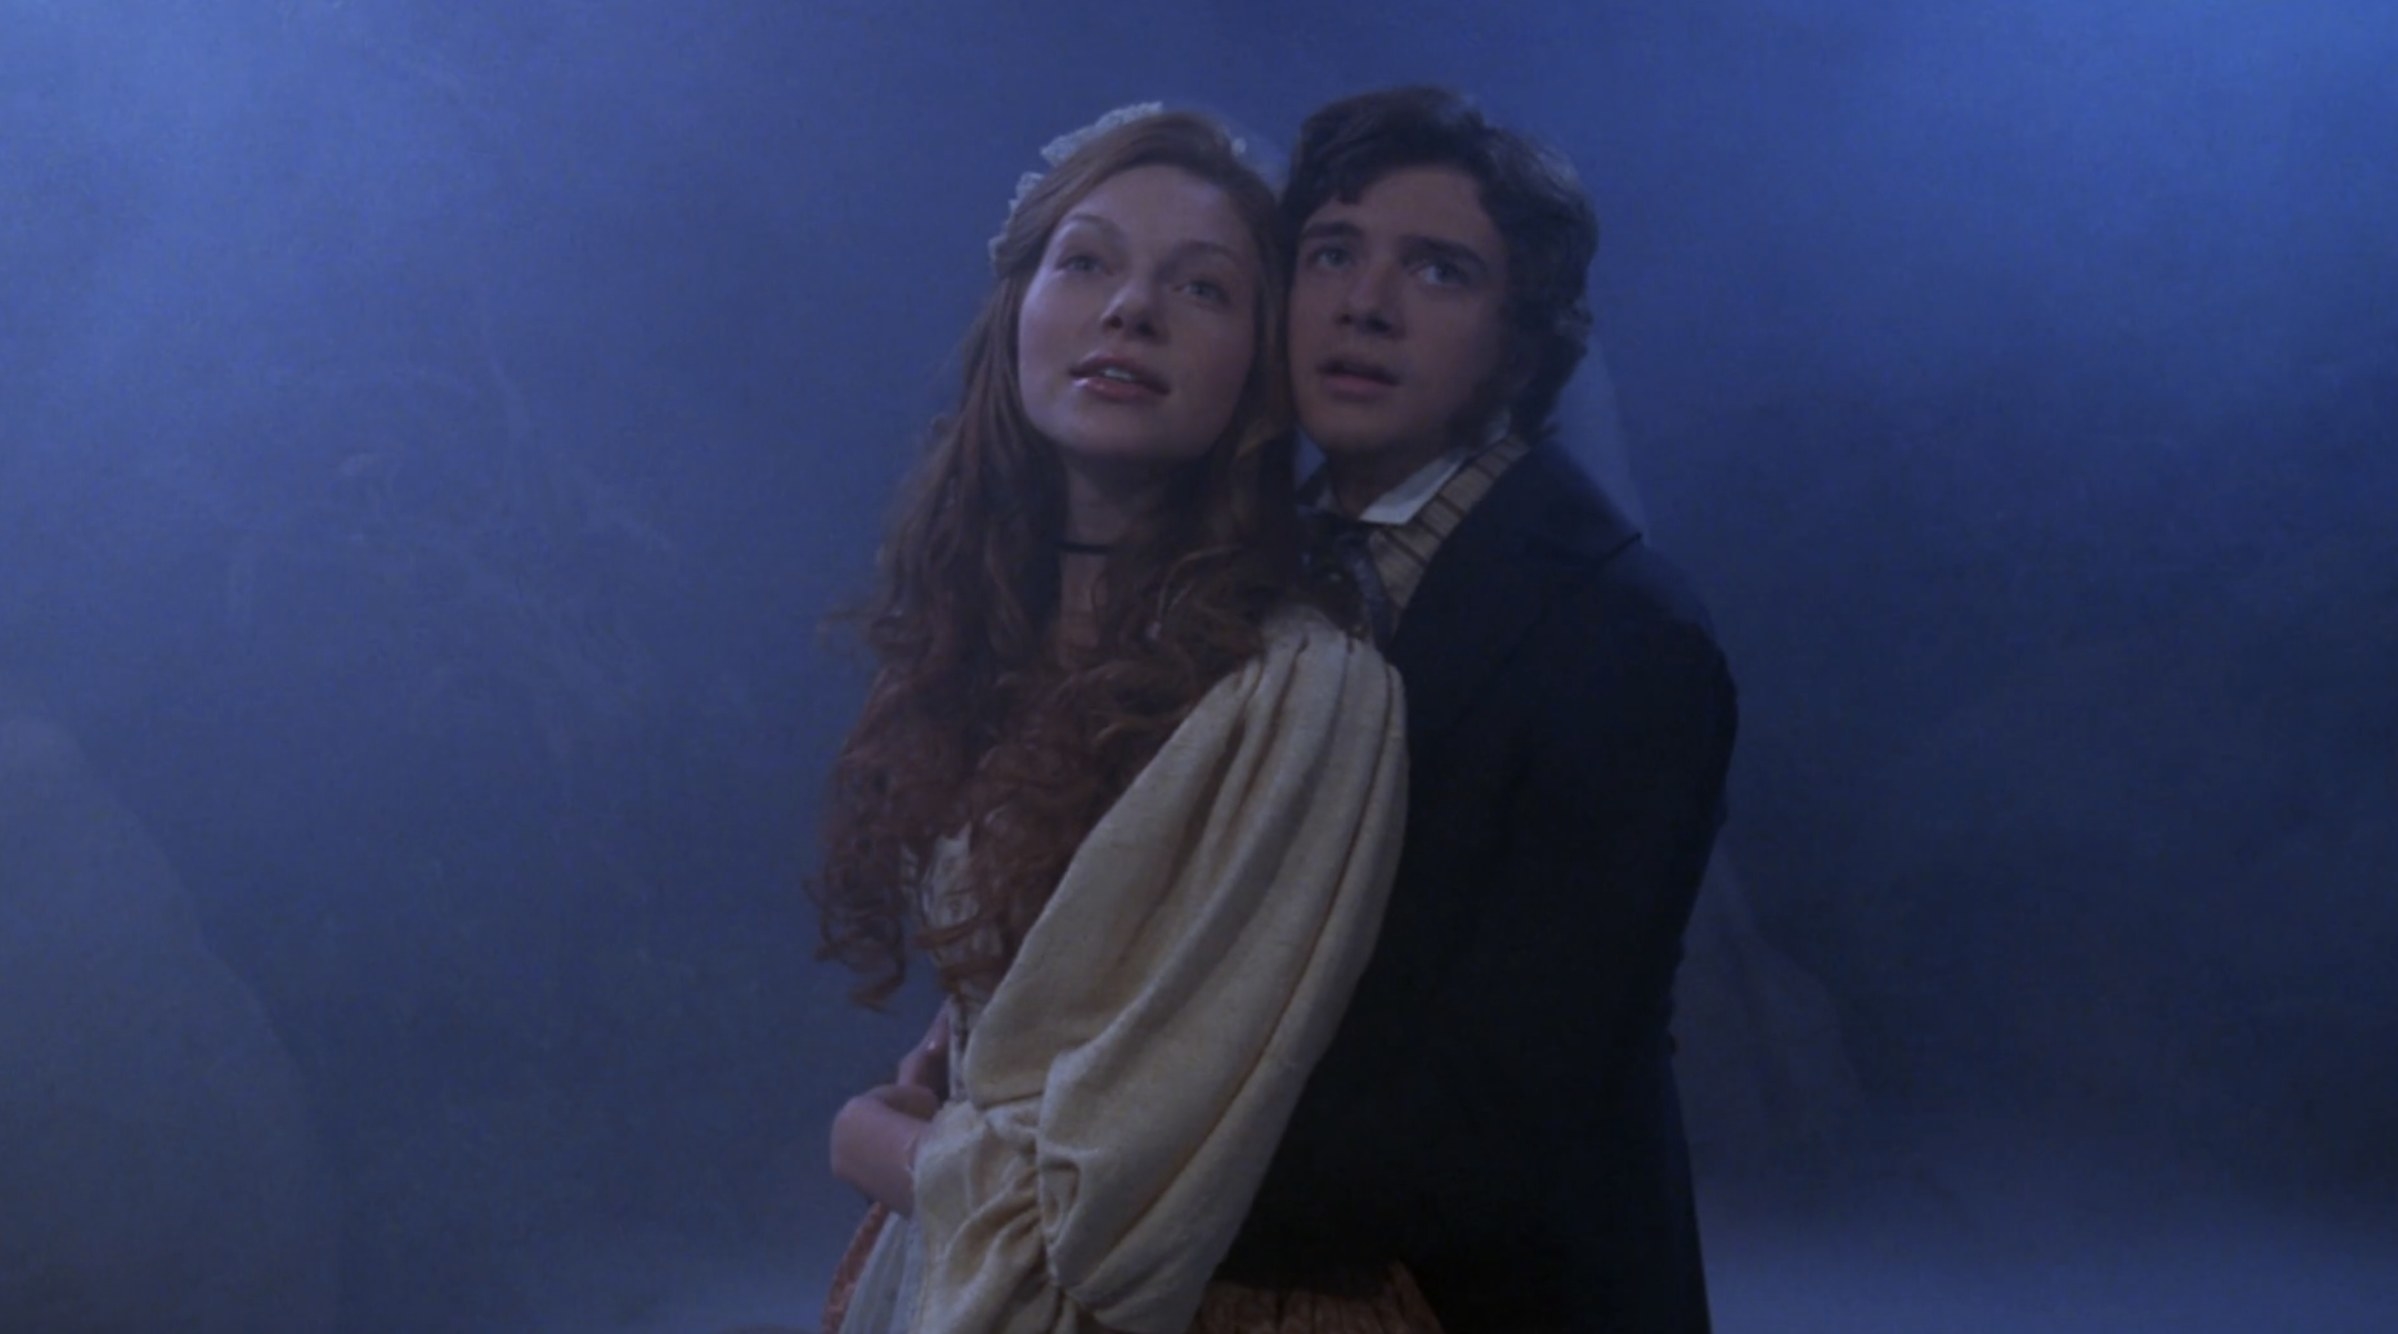 Eric and Donna re dressed as a 19th century romance hero and heroine, he holds her from behind